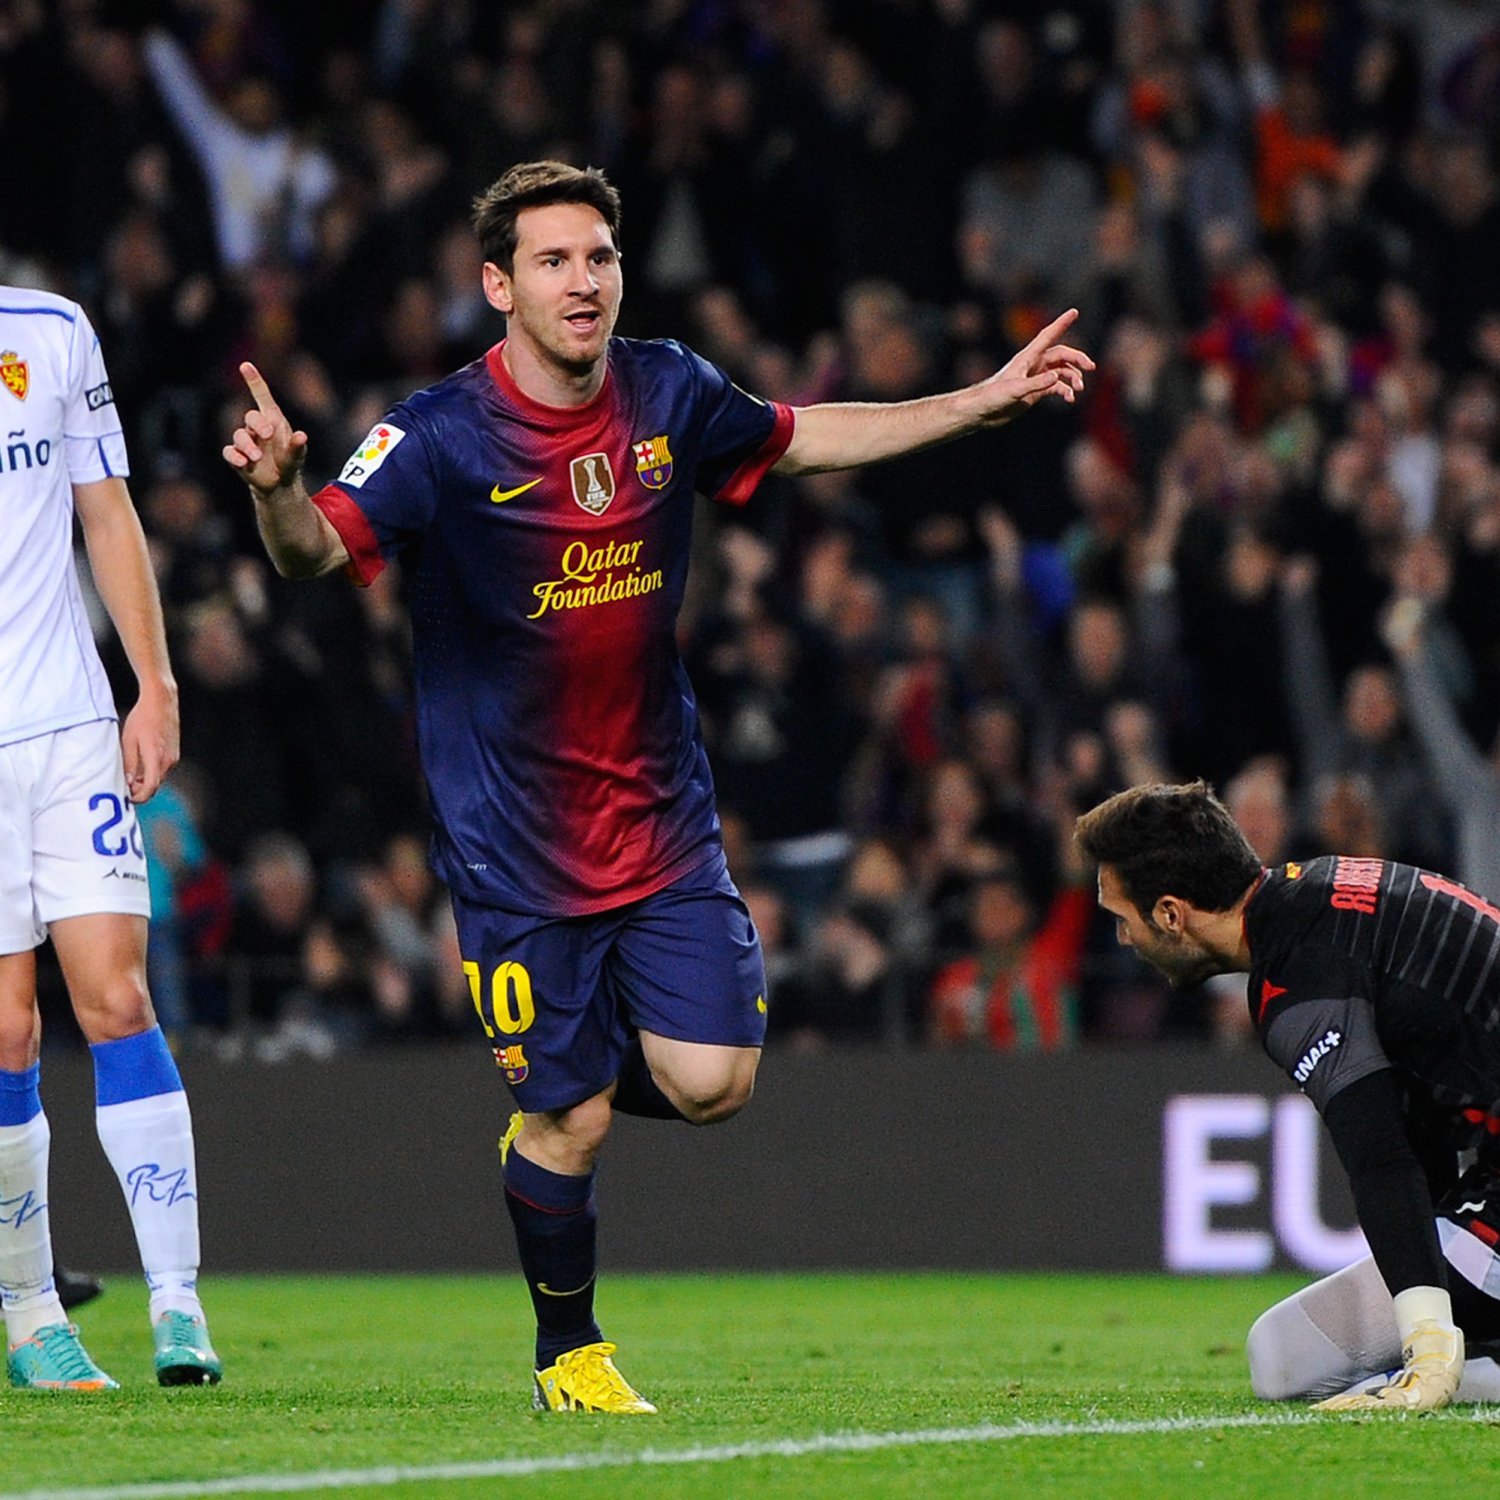 Lionel Messi Moves Closer to History, Barca Wins - Bleacher Report